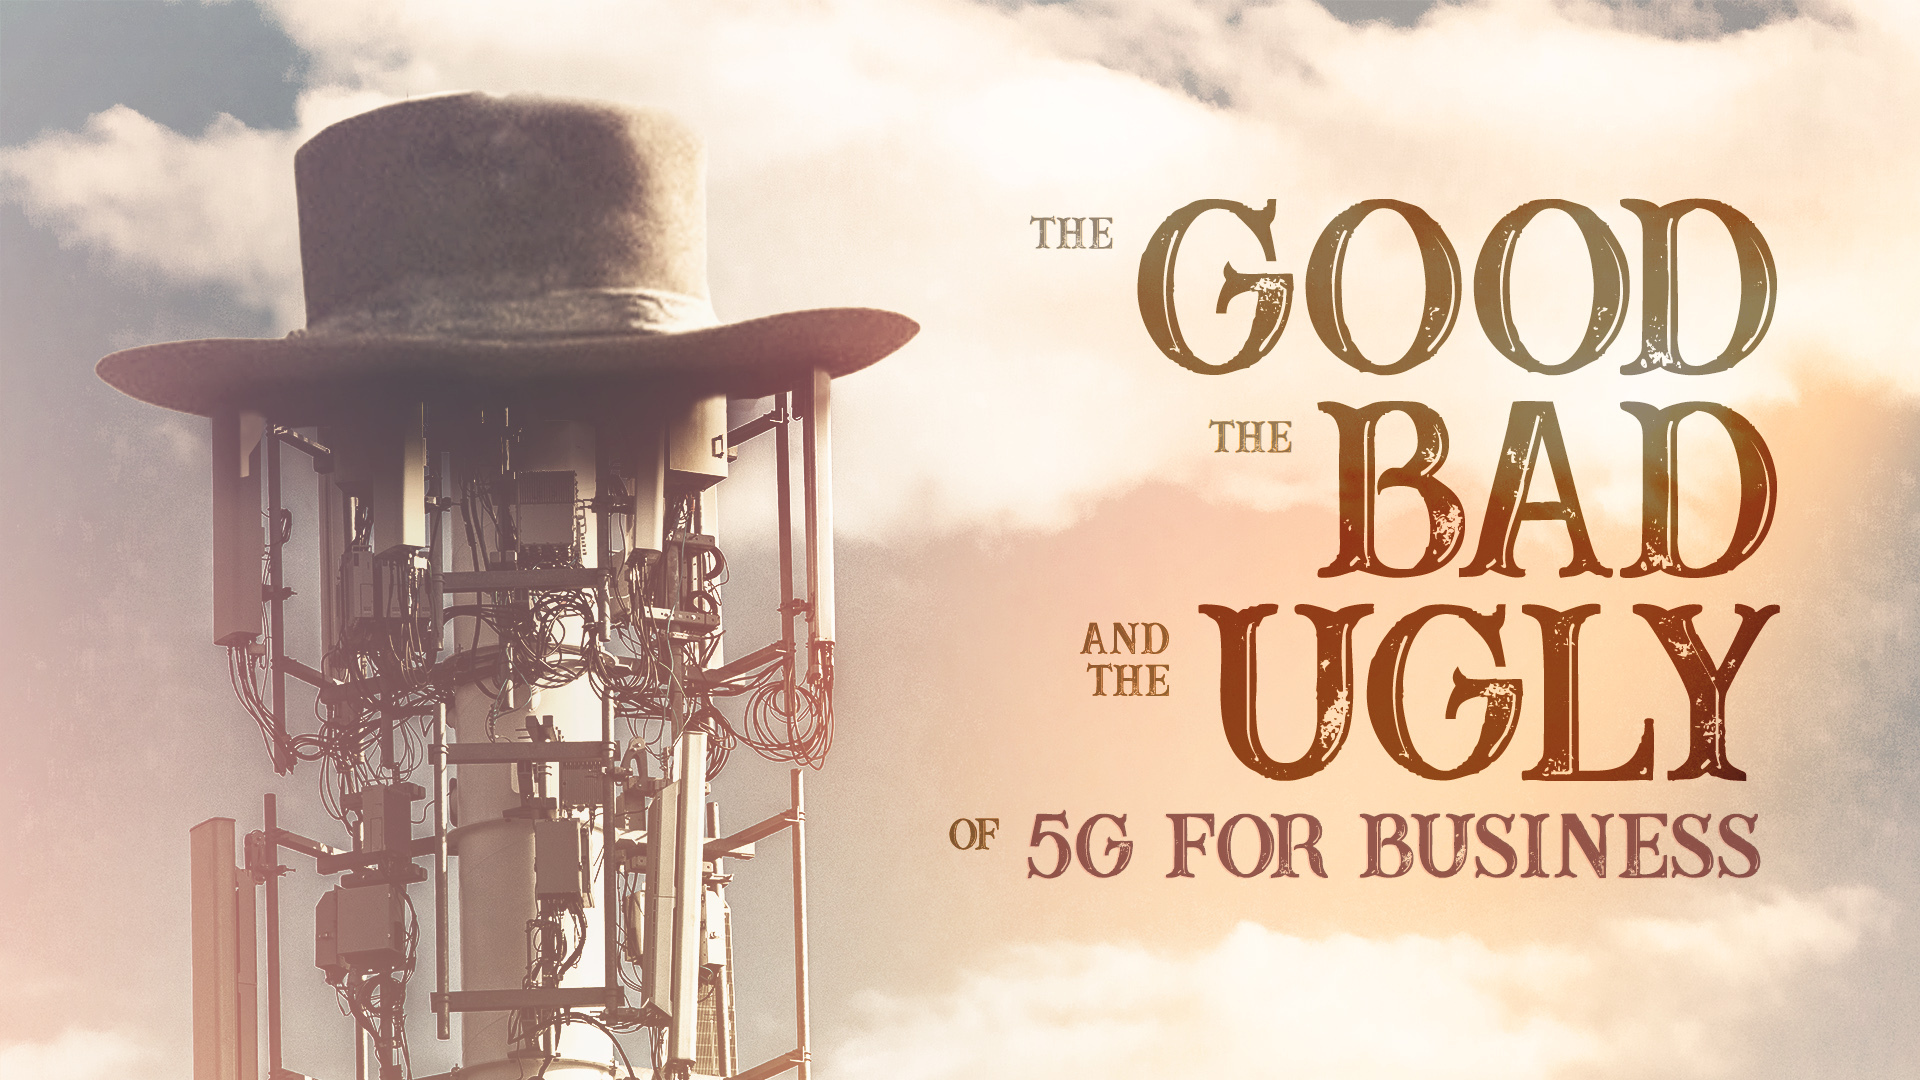 The Good, the Bad and the Ugly of 5G for Business